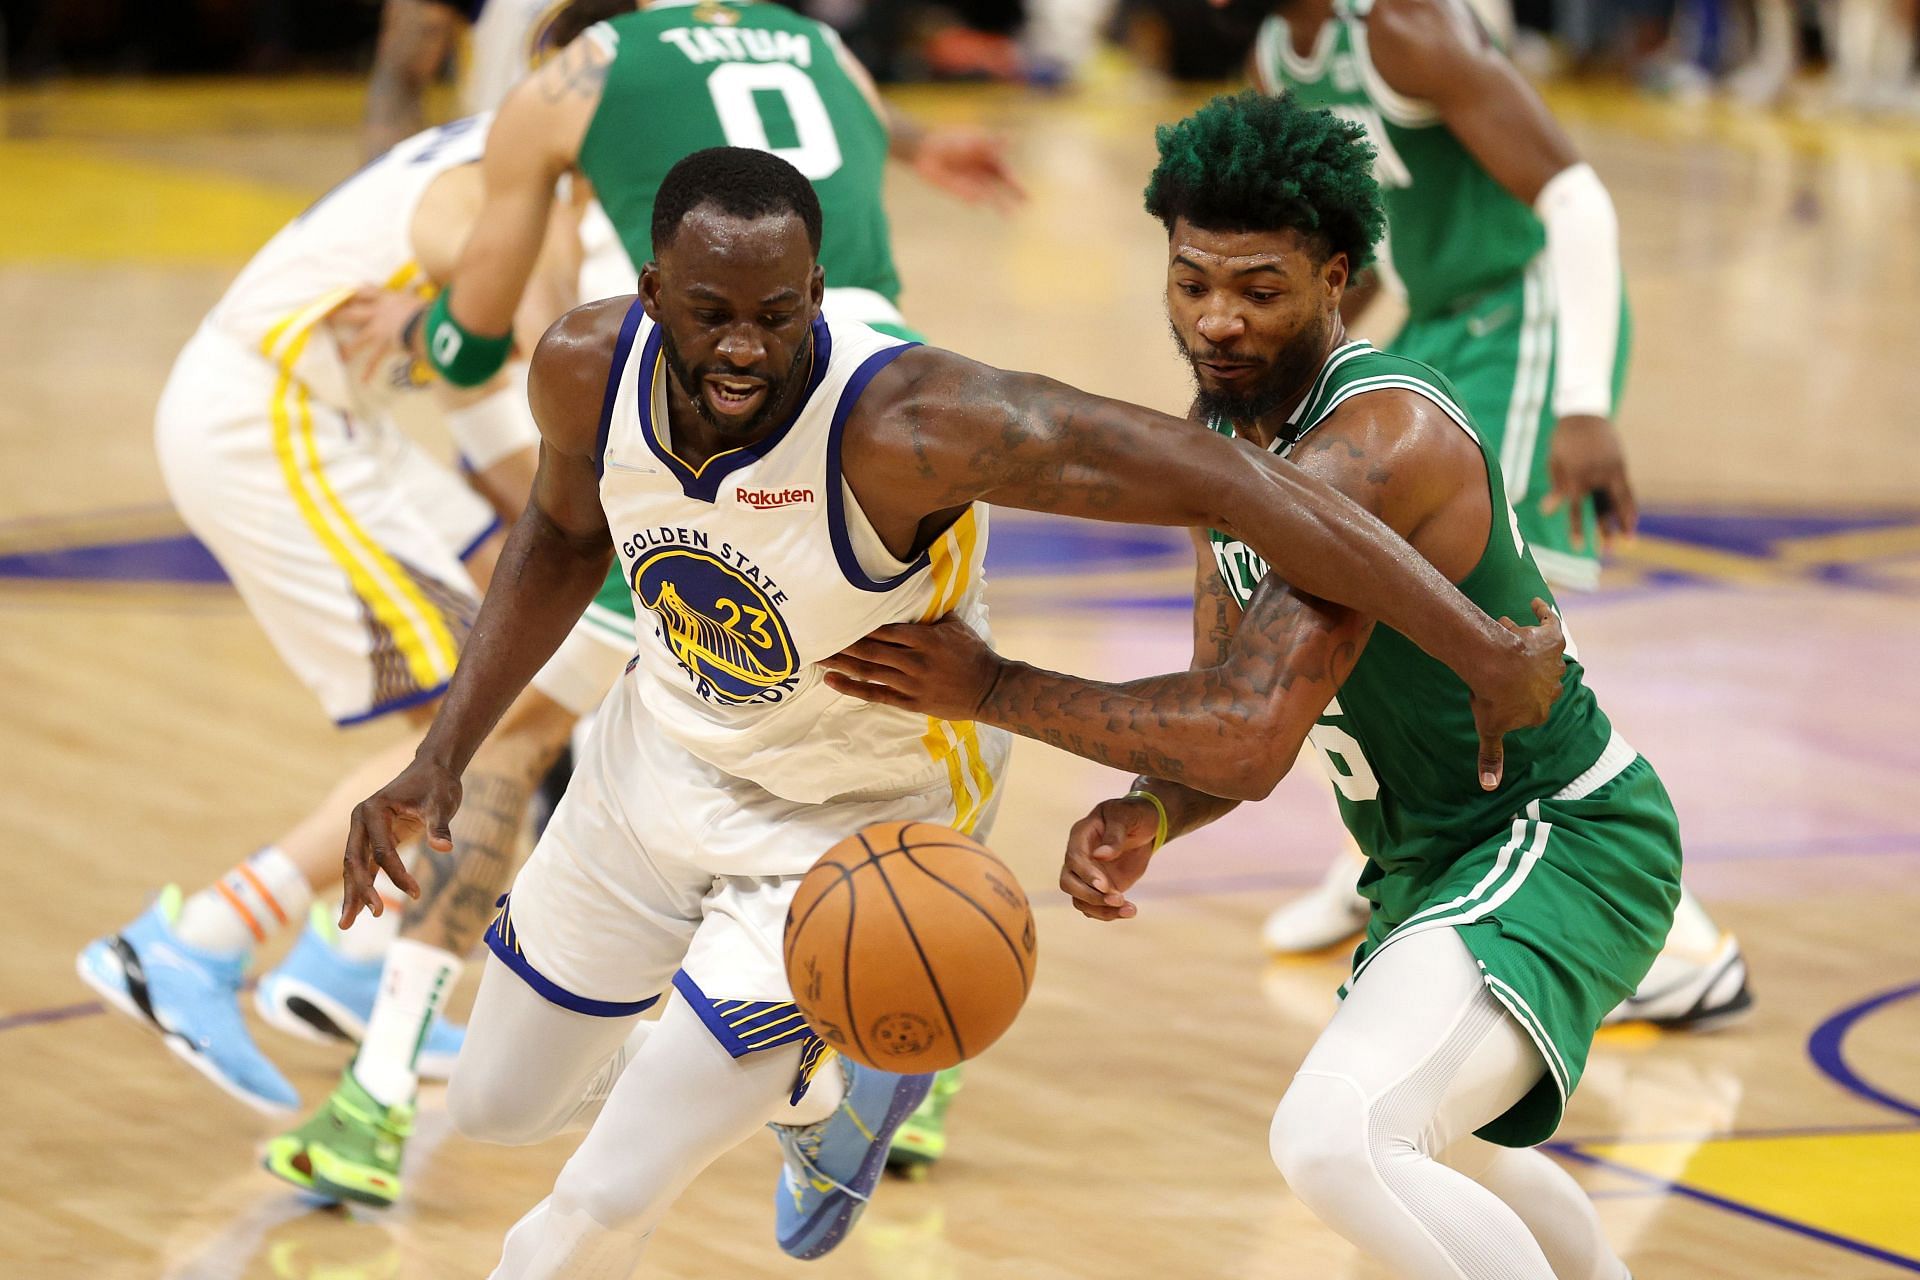 Draymond Green being guarded by Marcus Smart